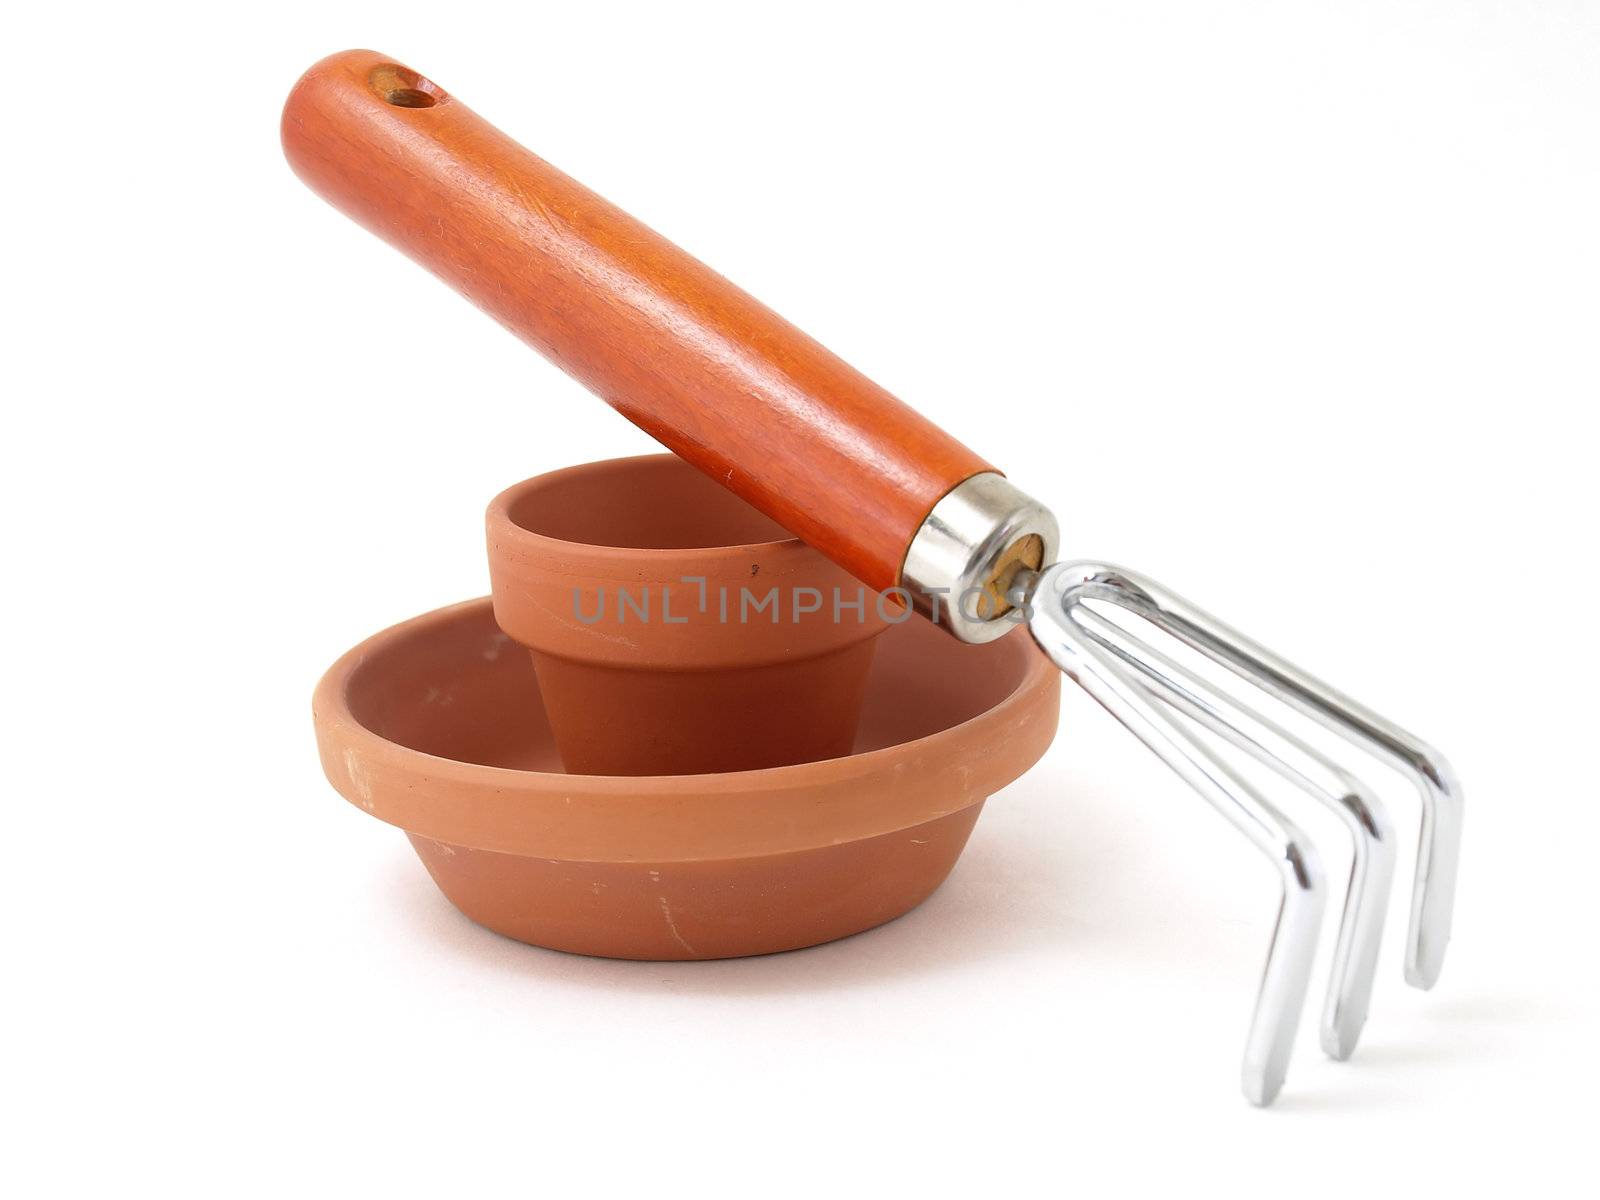 Gardening tool and terra cotta pot and saucer isolated against a white background.